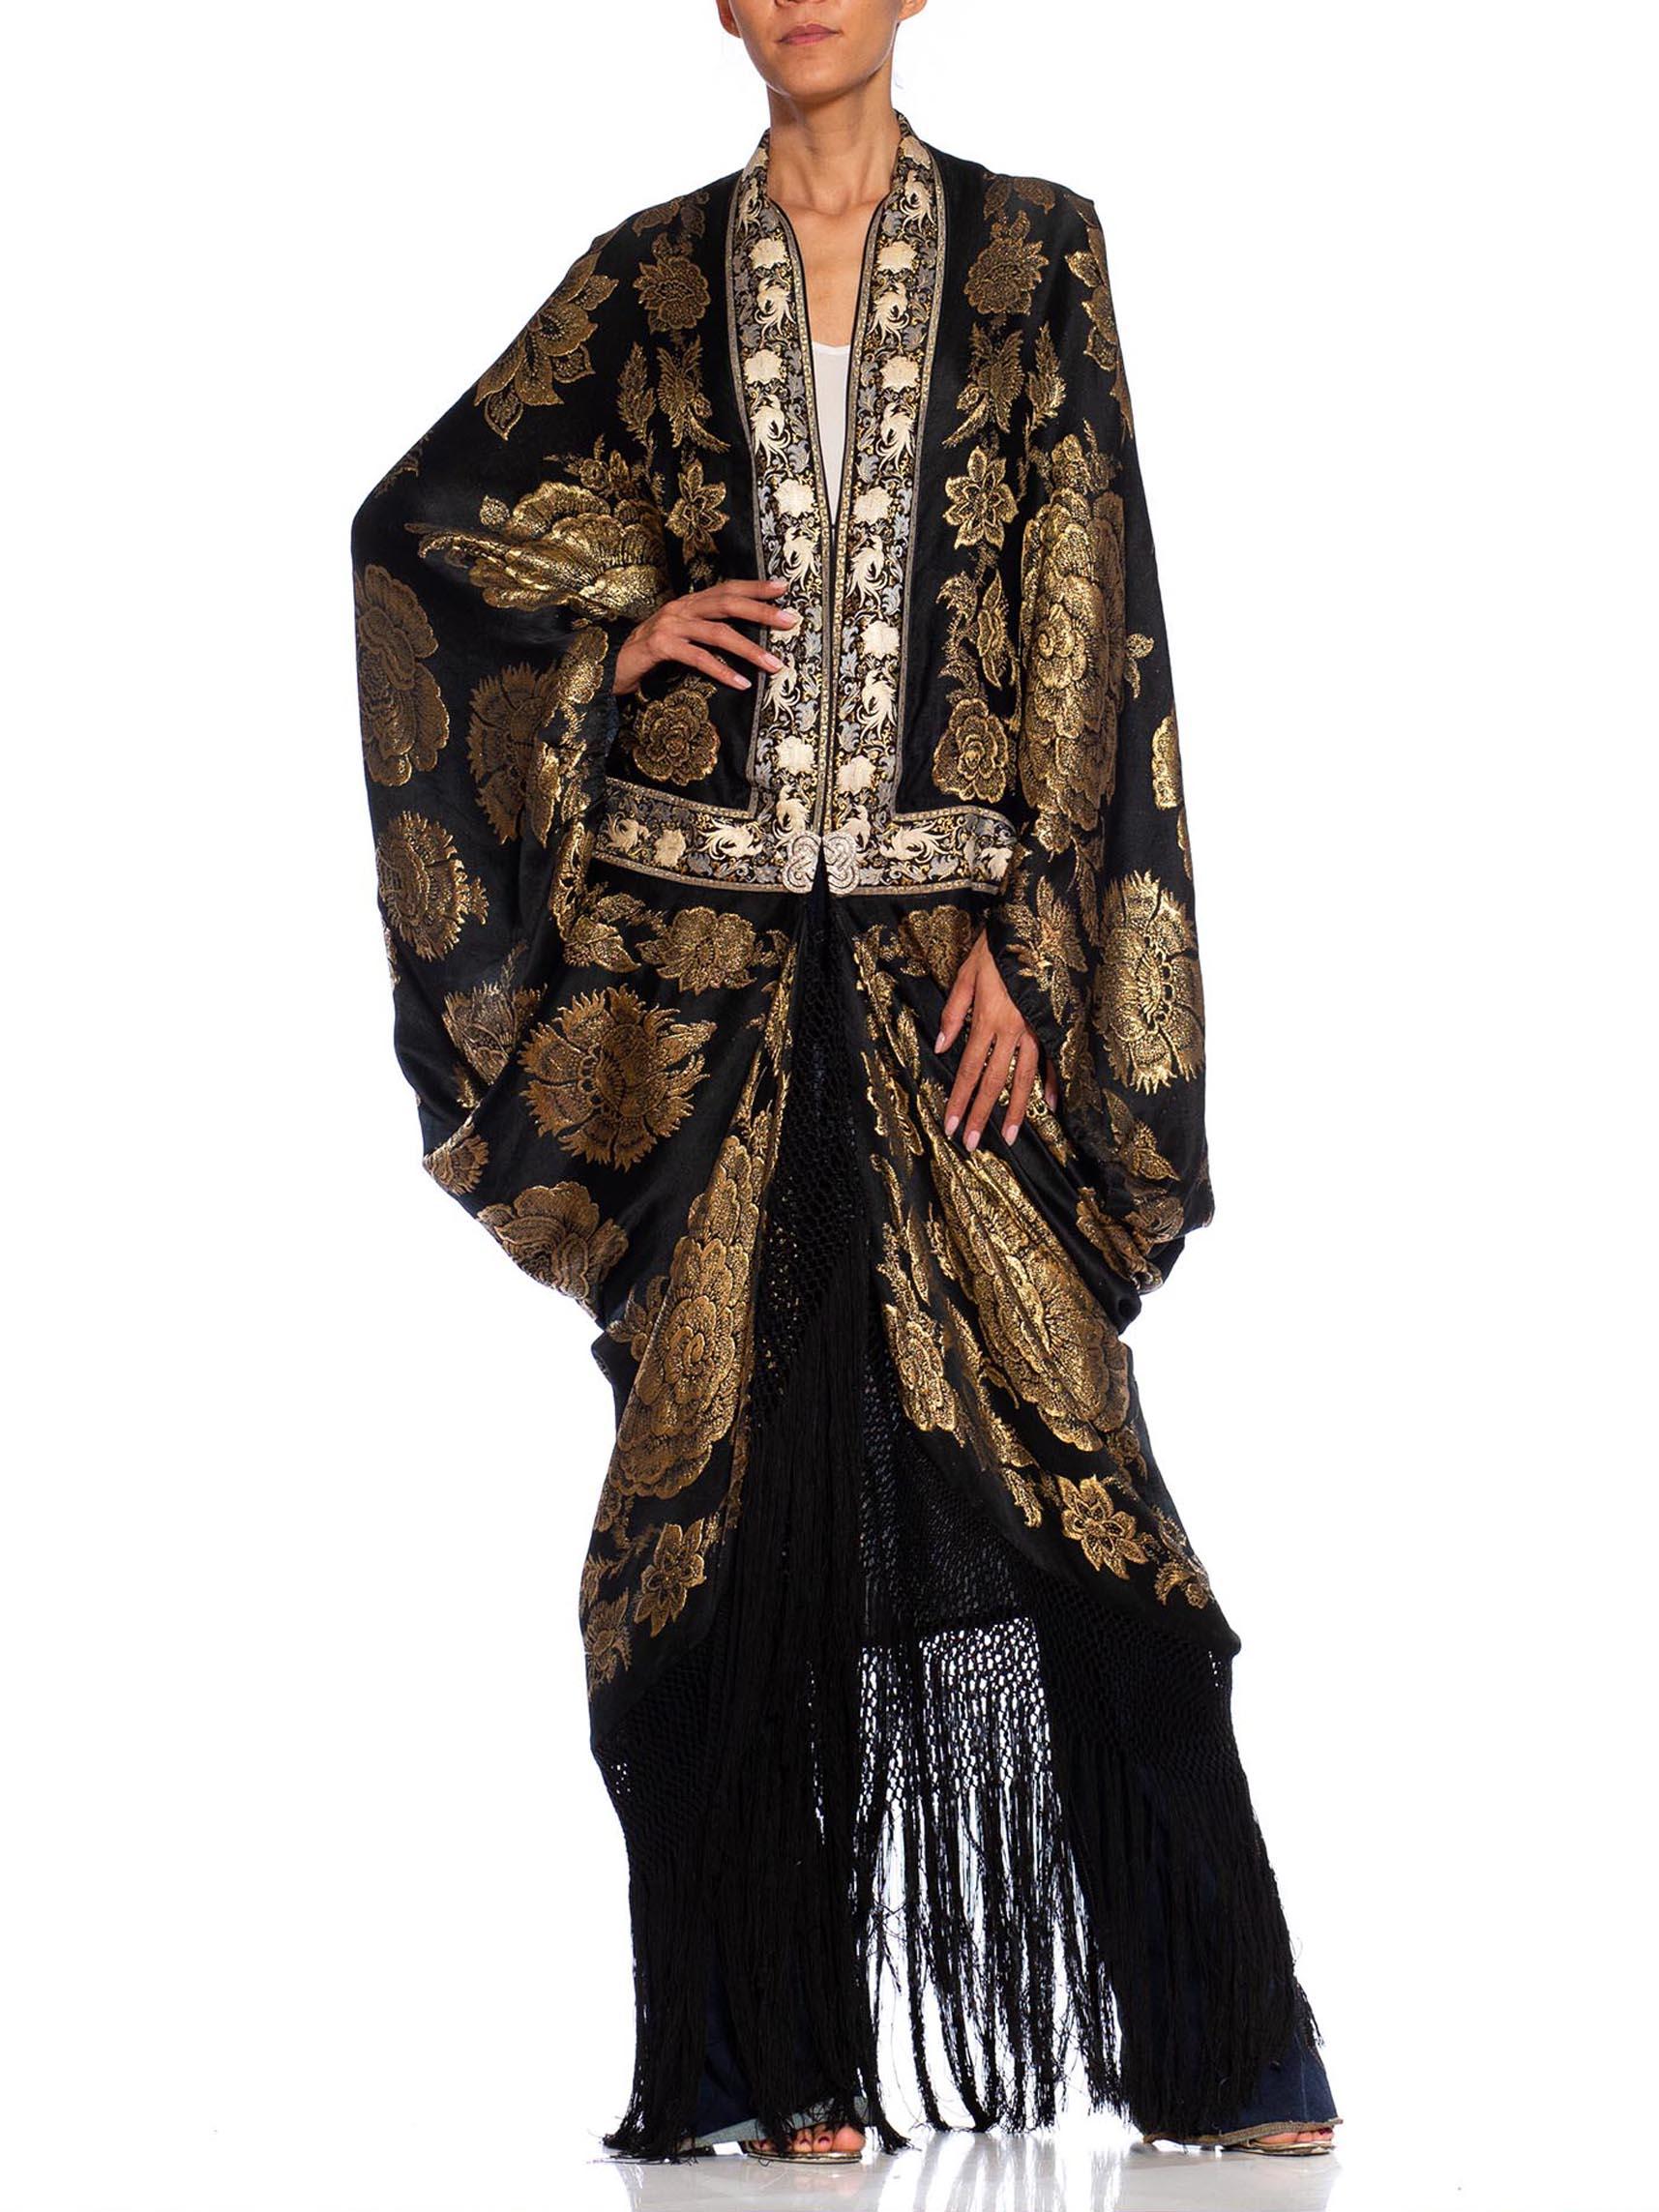 MORPHEW COLLECTION Black, Gold & Cream Metallic Silk Lamé Cocoon With Fringe An For Sale 4